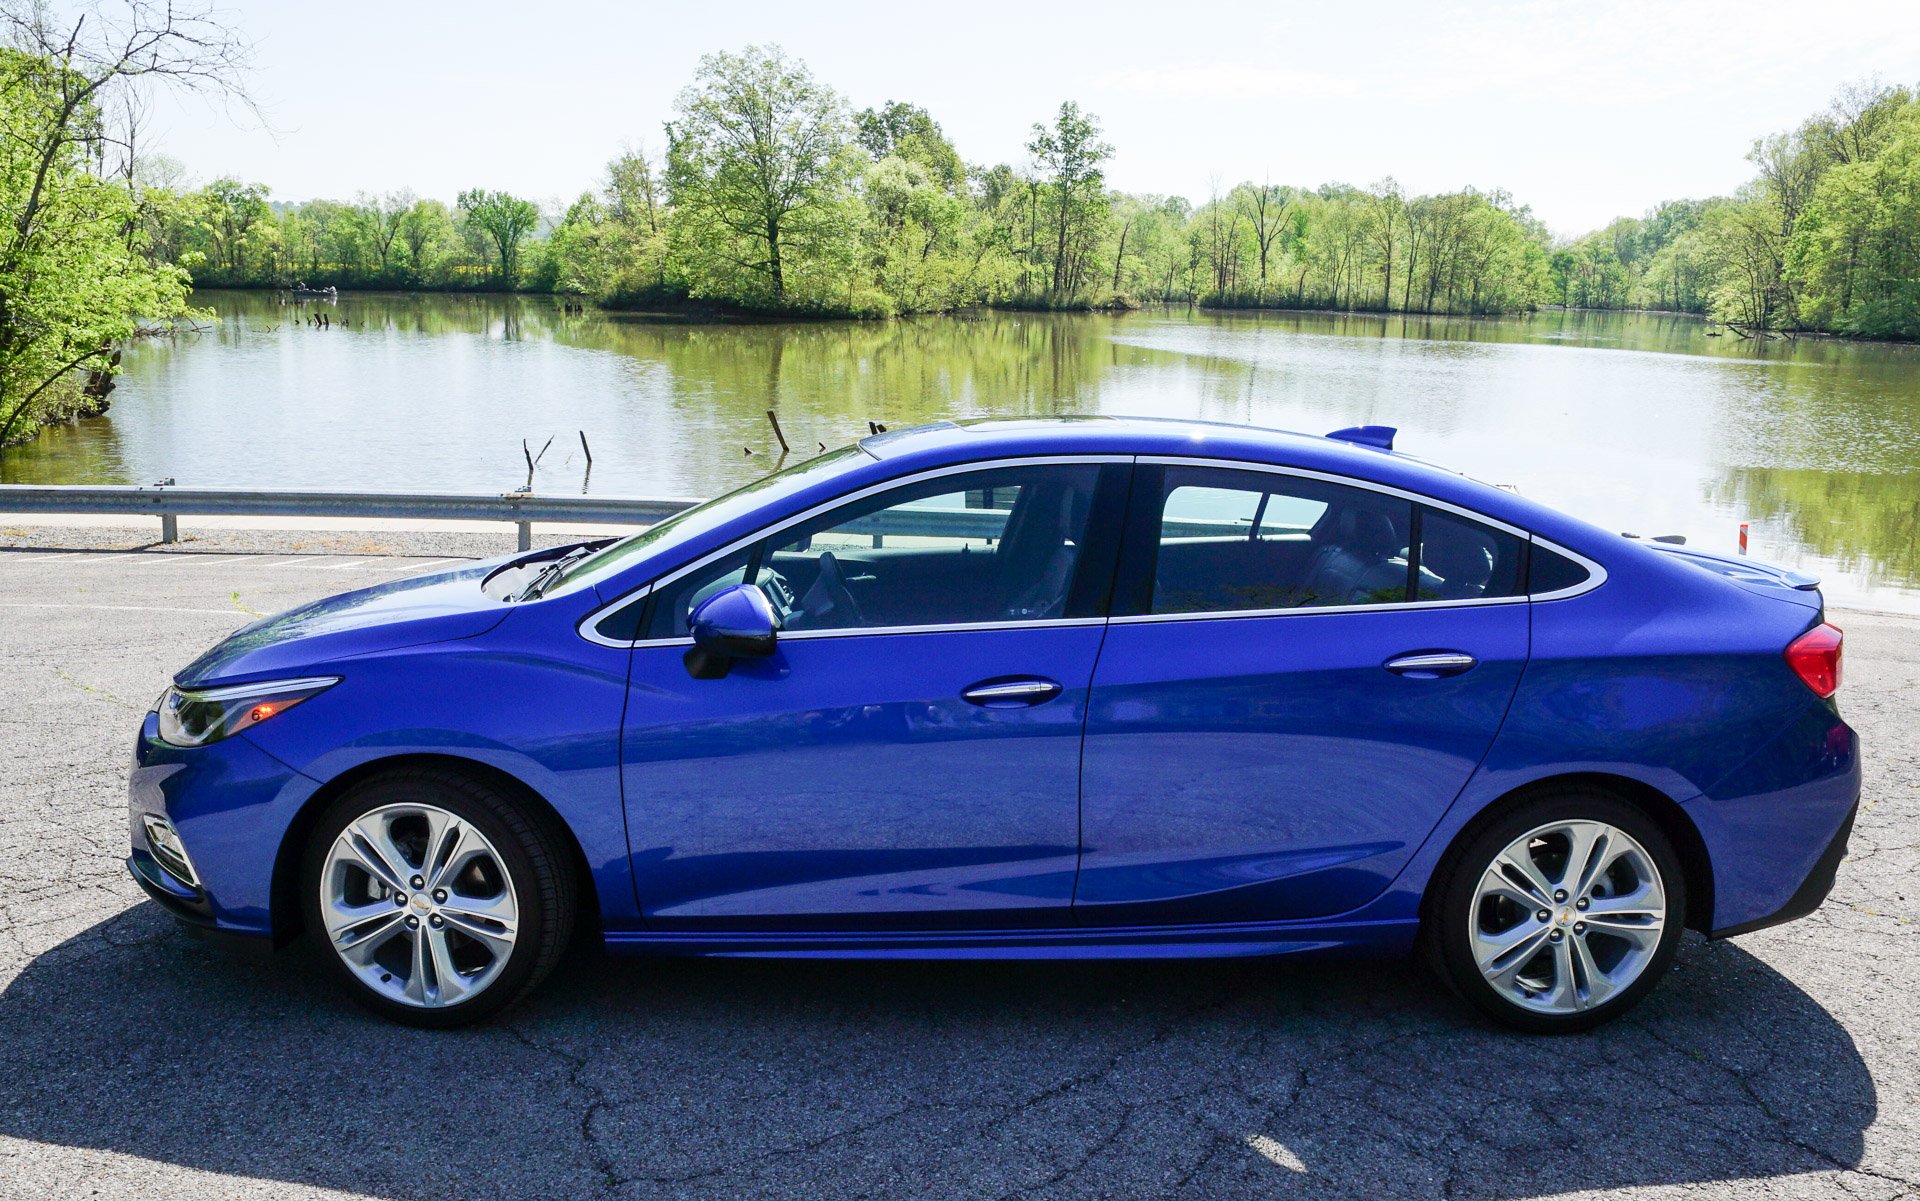 First Drive Review: 2016 Chevrolet Cruze - 95 Octane